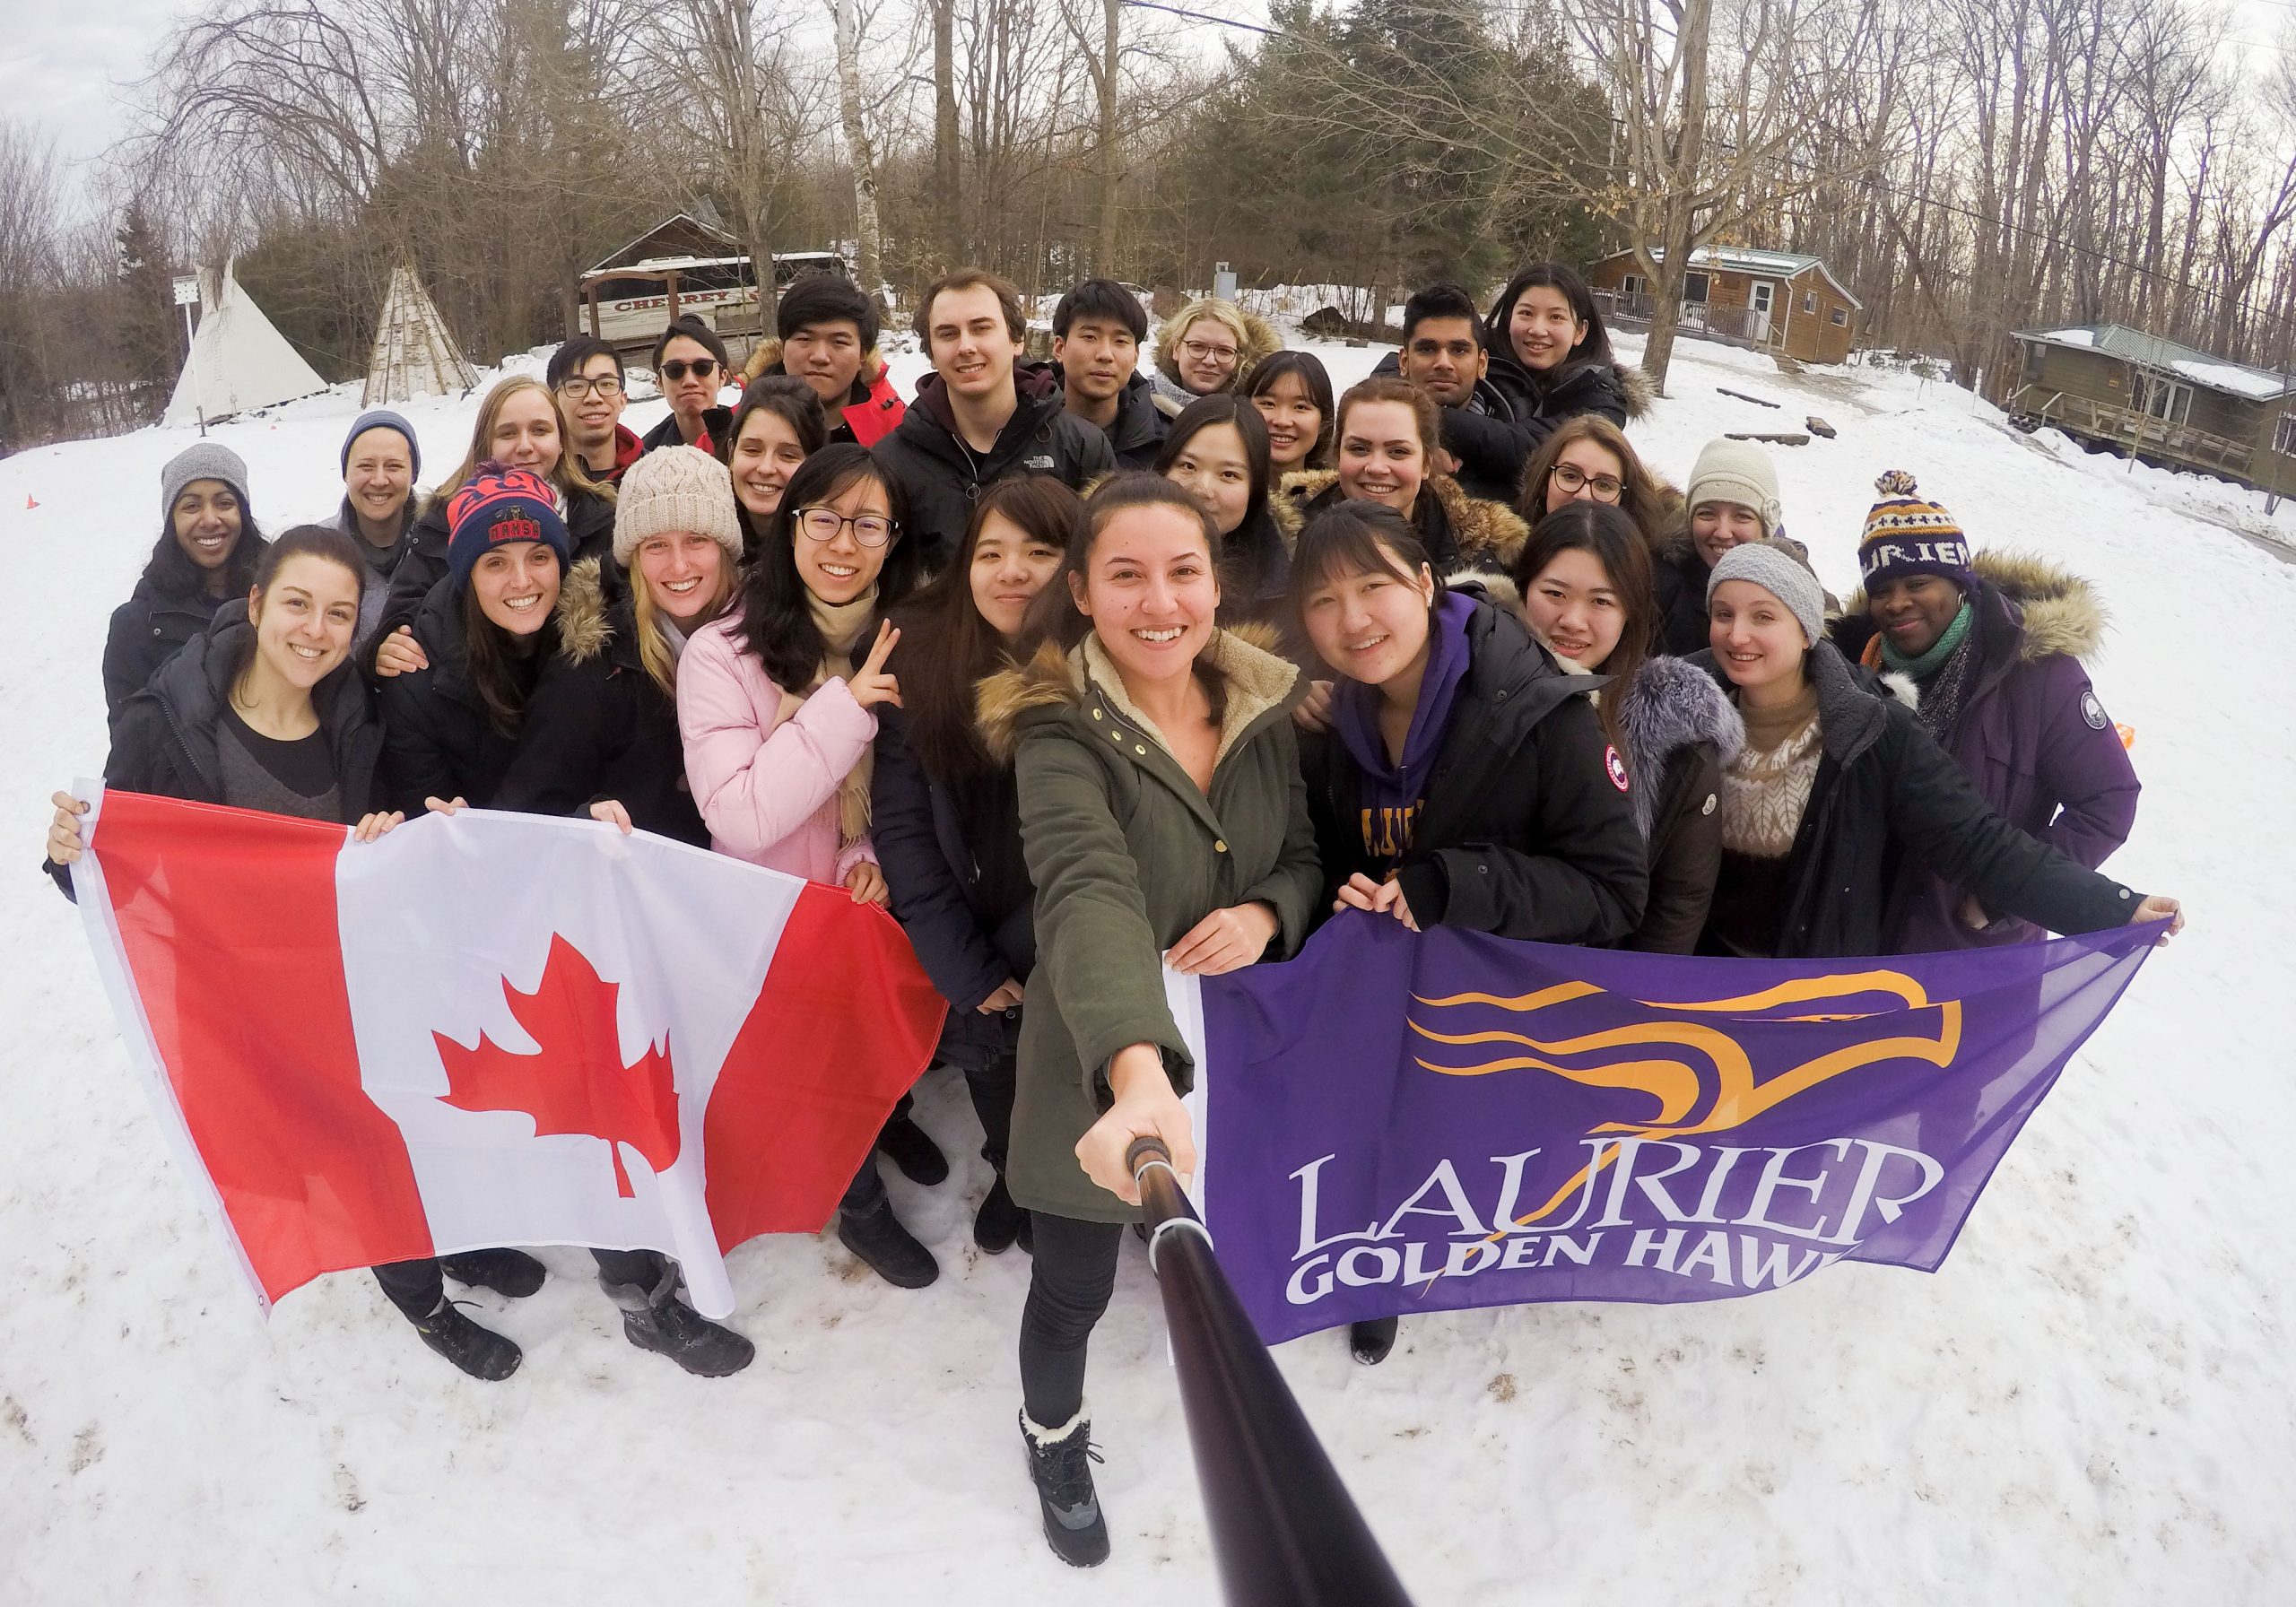 Students standing outside in the winter holding a Canadian flag and a Laurier flag